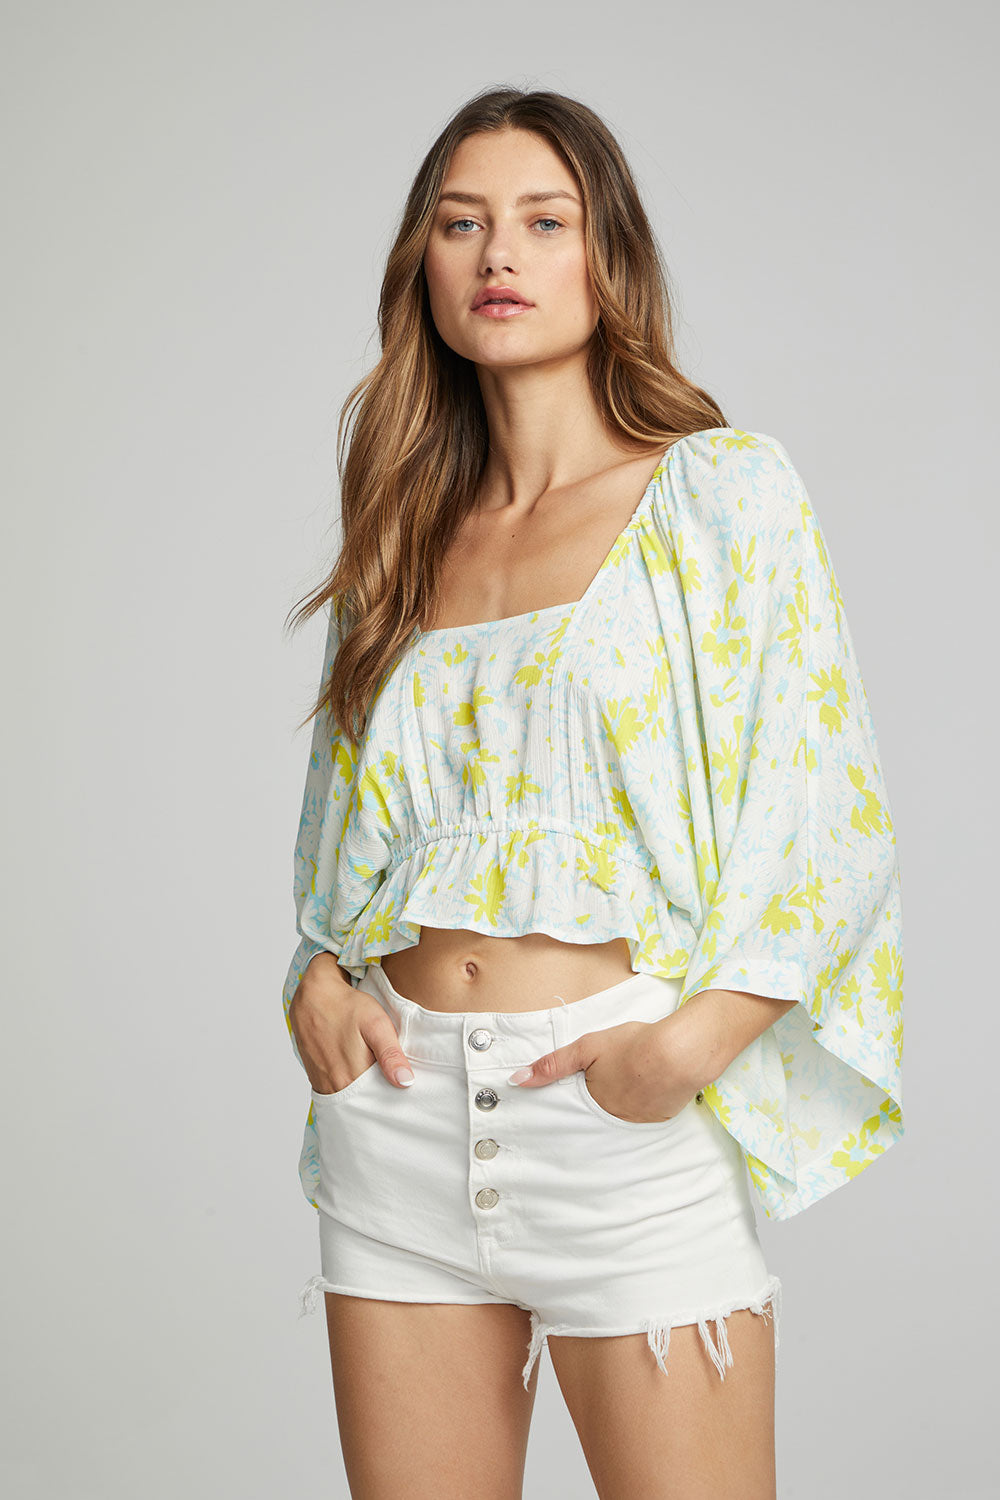 Monarch Crop Top - Daisy Floral Print WOMENS chaserbrand